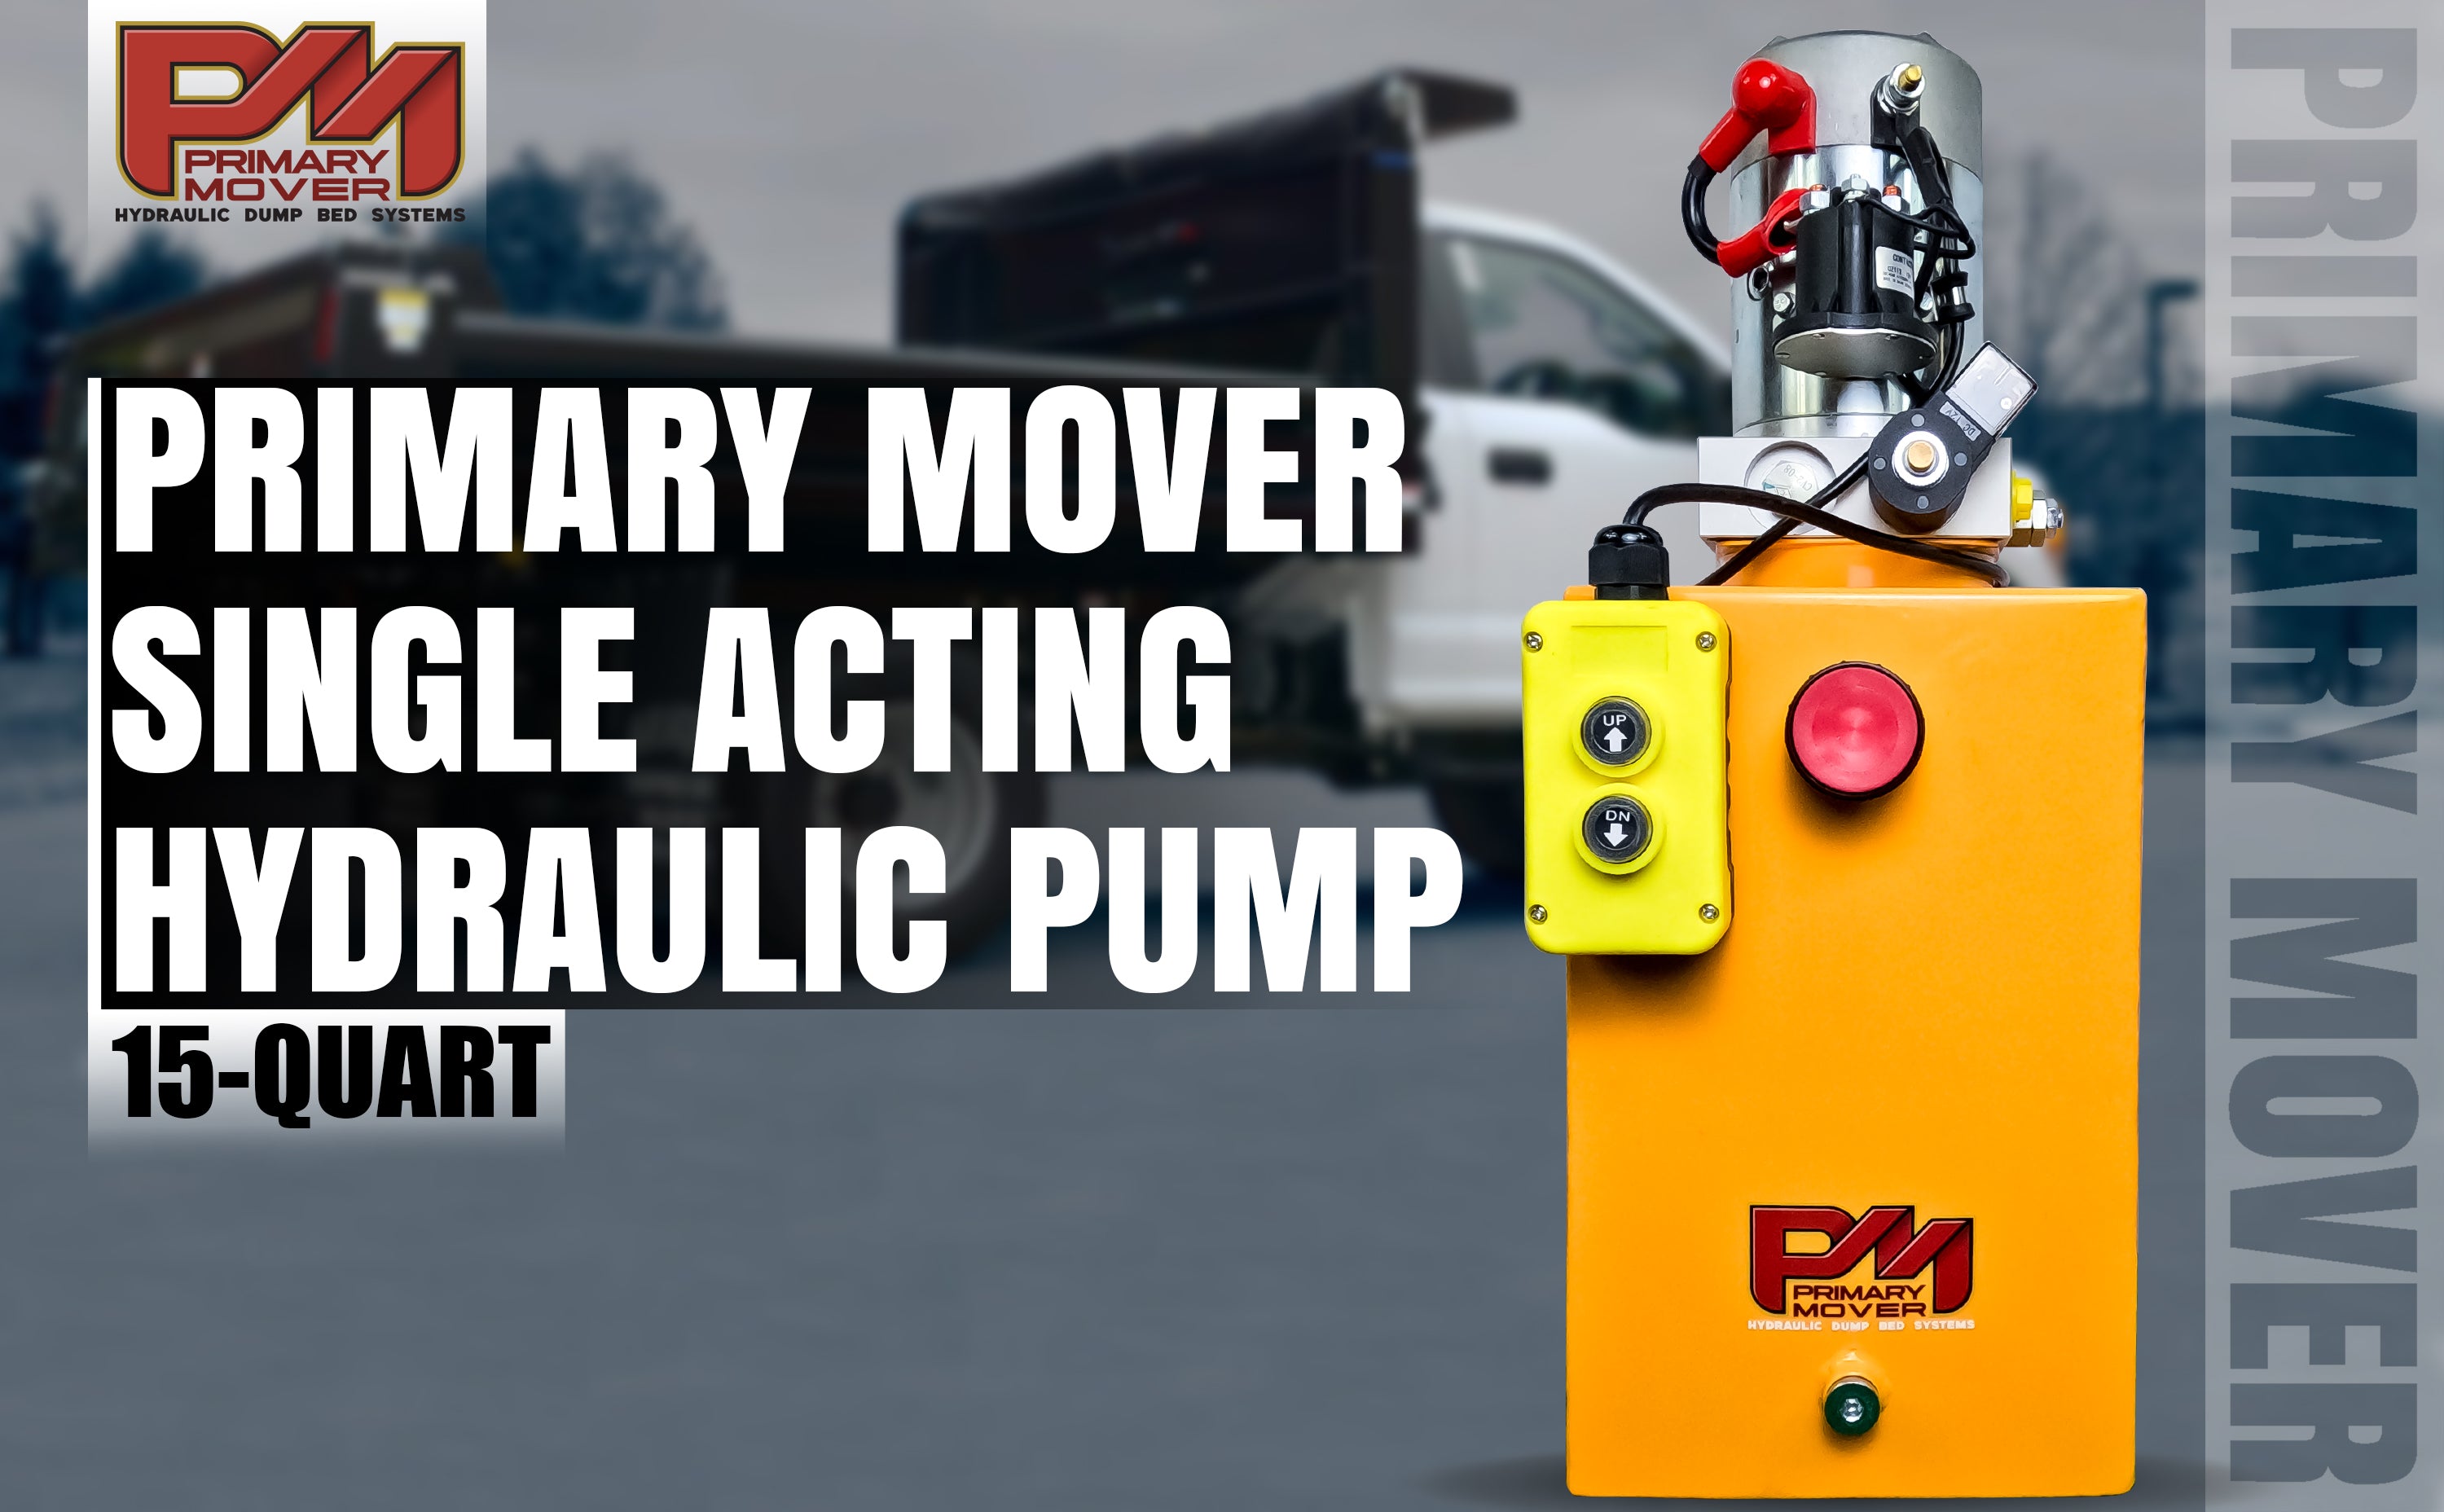 Primary Mover 12V Single-Acting Hydraulic Pump - Steel Reservoir for hydraulic dump bed systems. High flow, 3200 PSI relief setting, 2.5 GPM, 4 Quart Reservoir, SAE #8 Port.